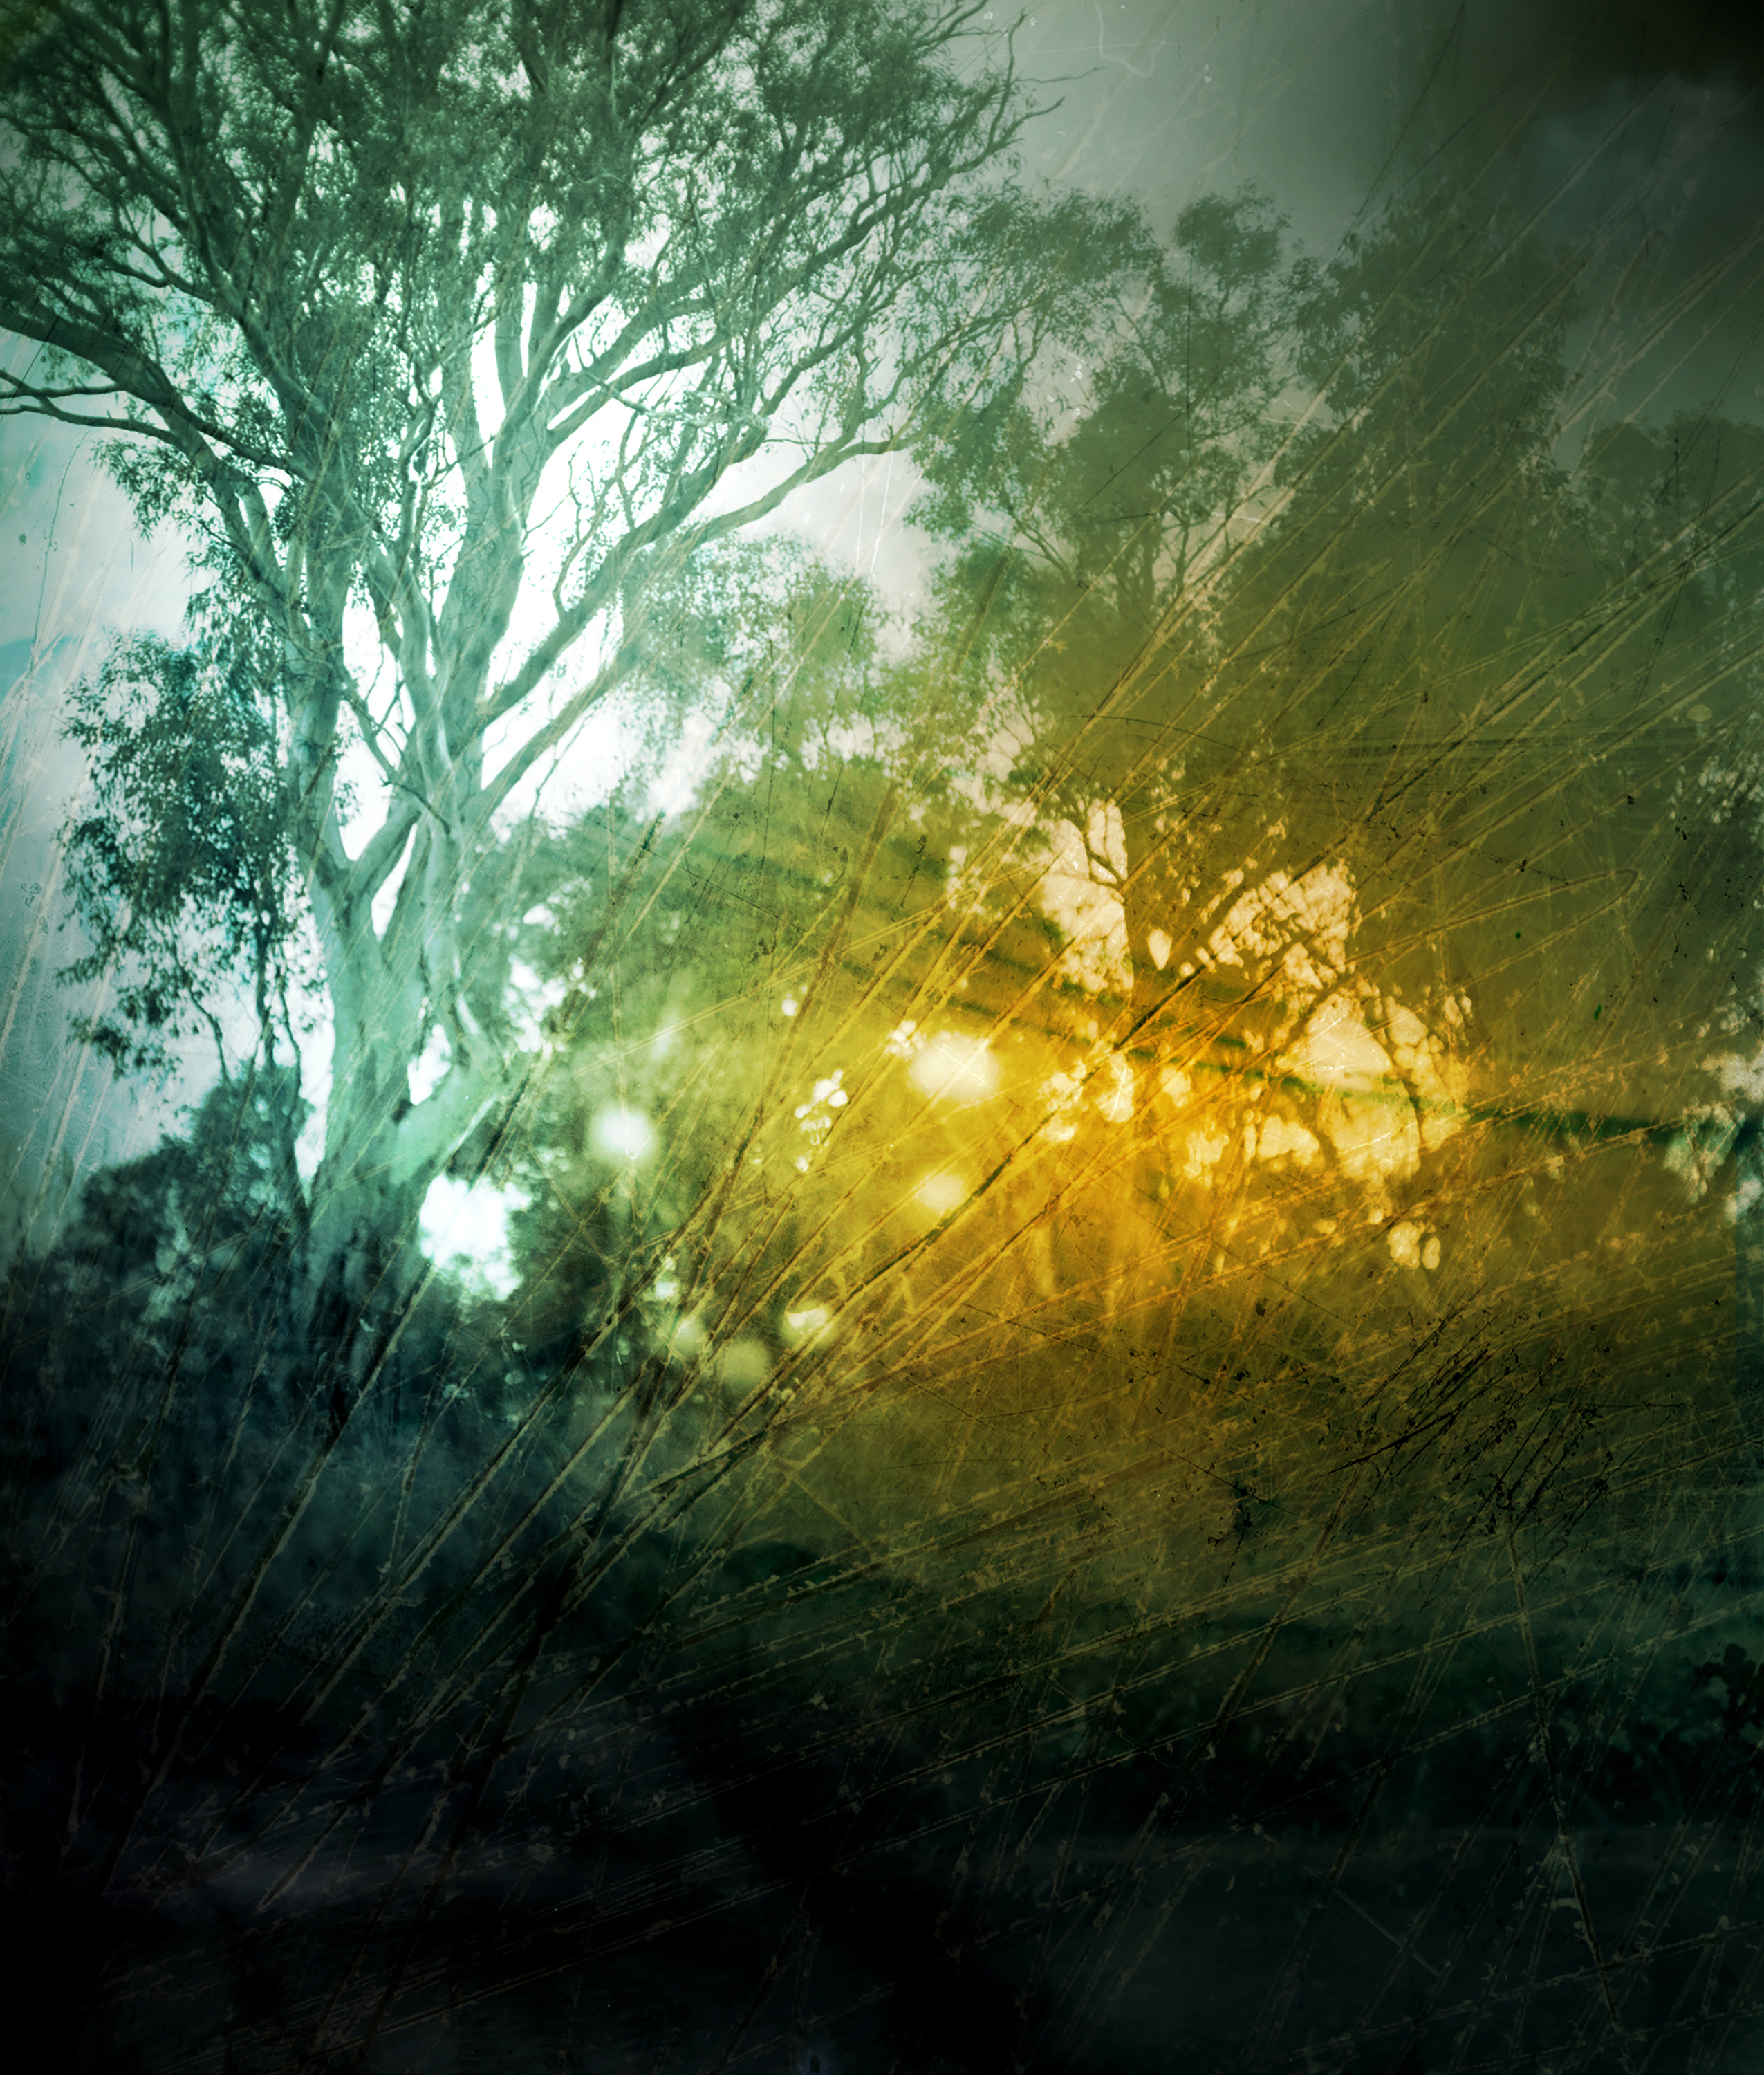 An image of gum trees with a yellow and blue tint